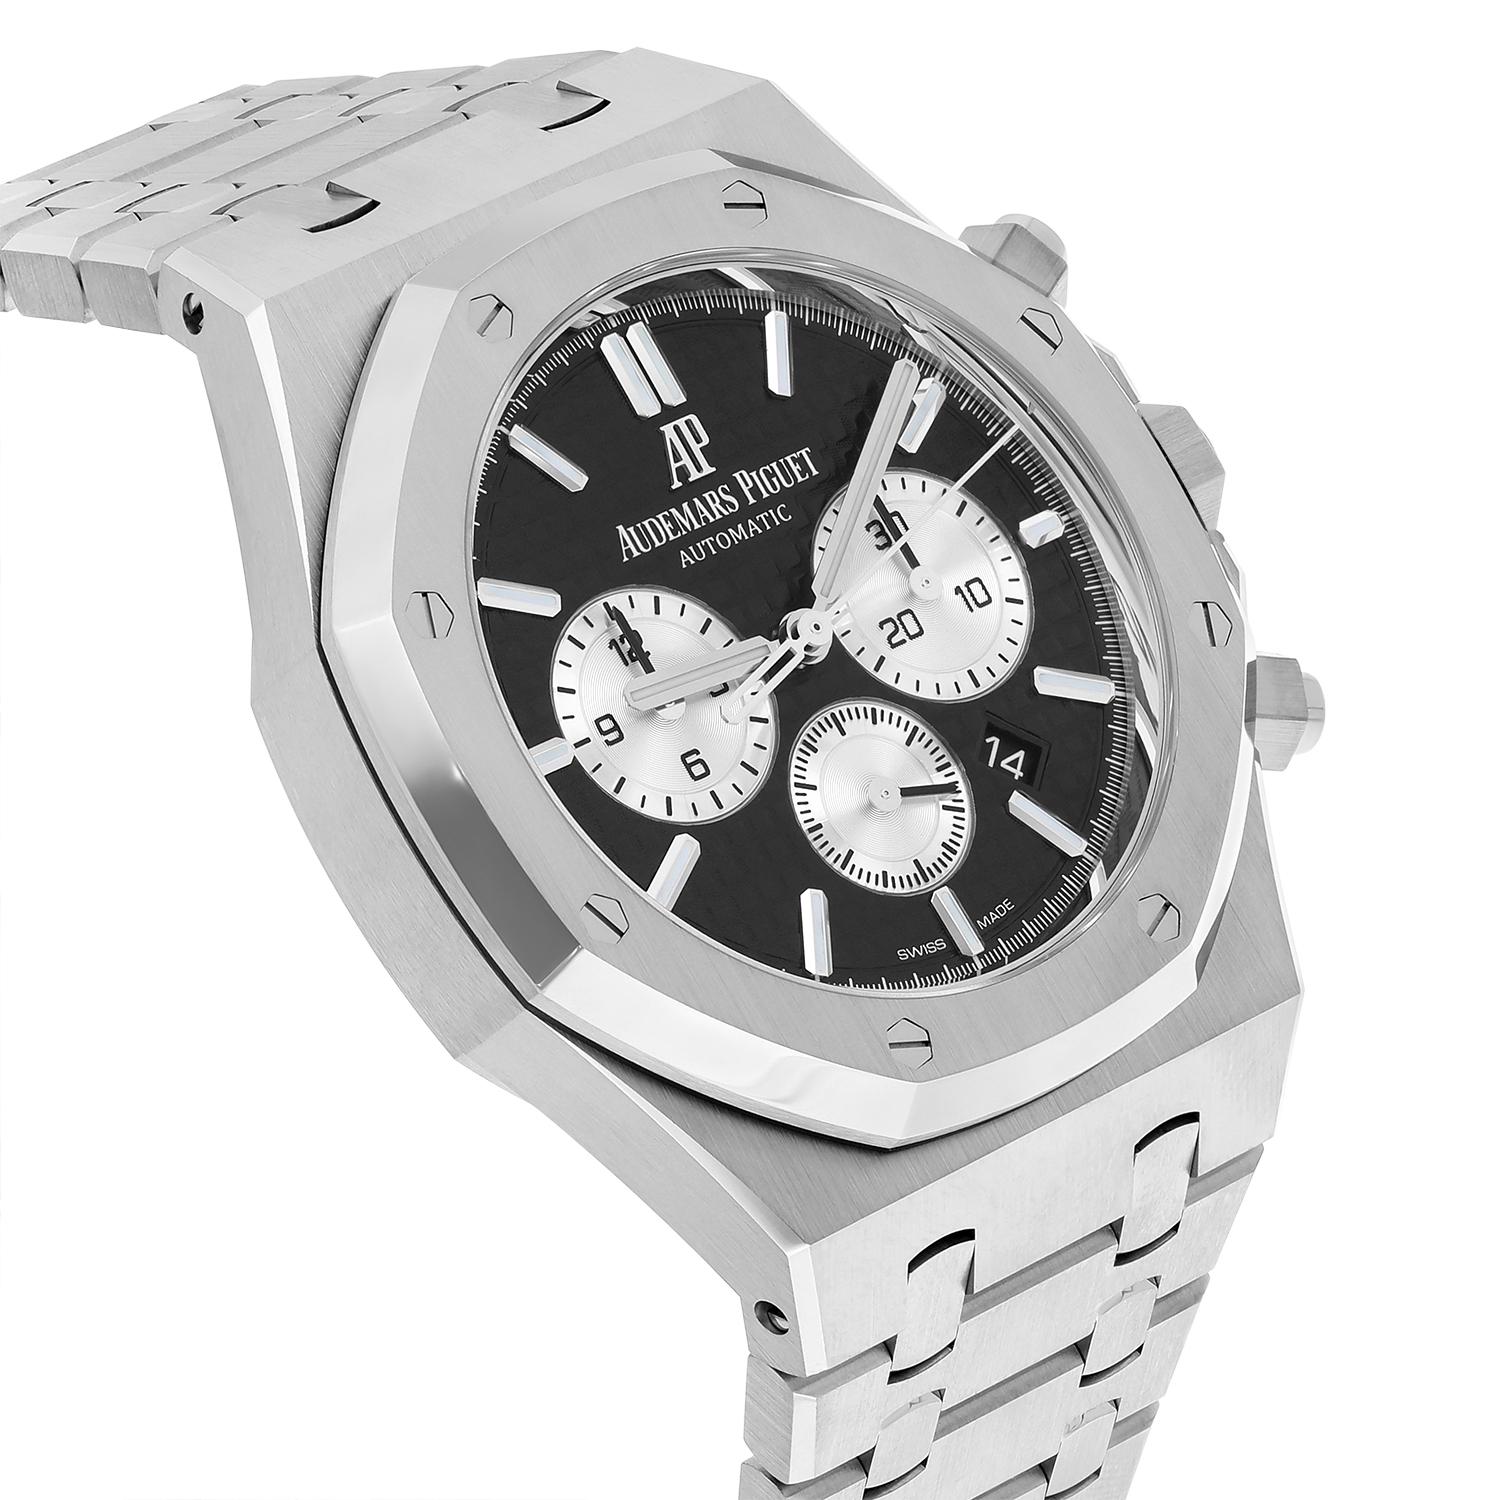 Audemars Piguet Royal Oak Chrono Steel Mens Watch 26331ST.OO.1220ST.02 Unworn In New Condition For Sale In New York, NY